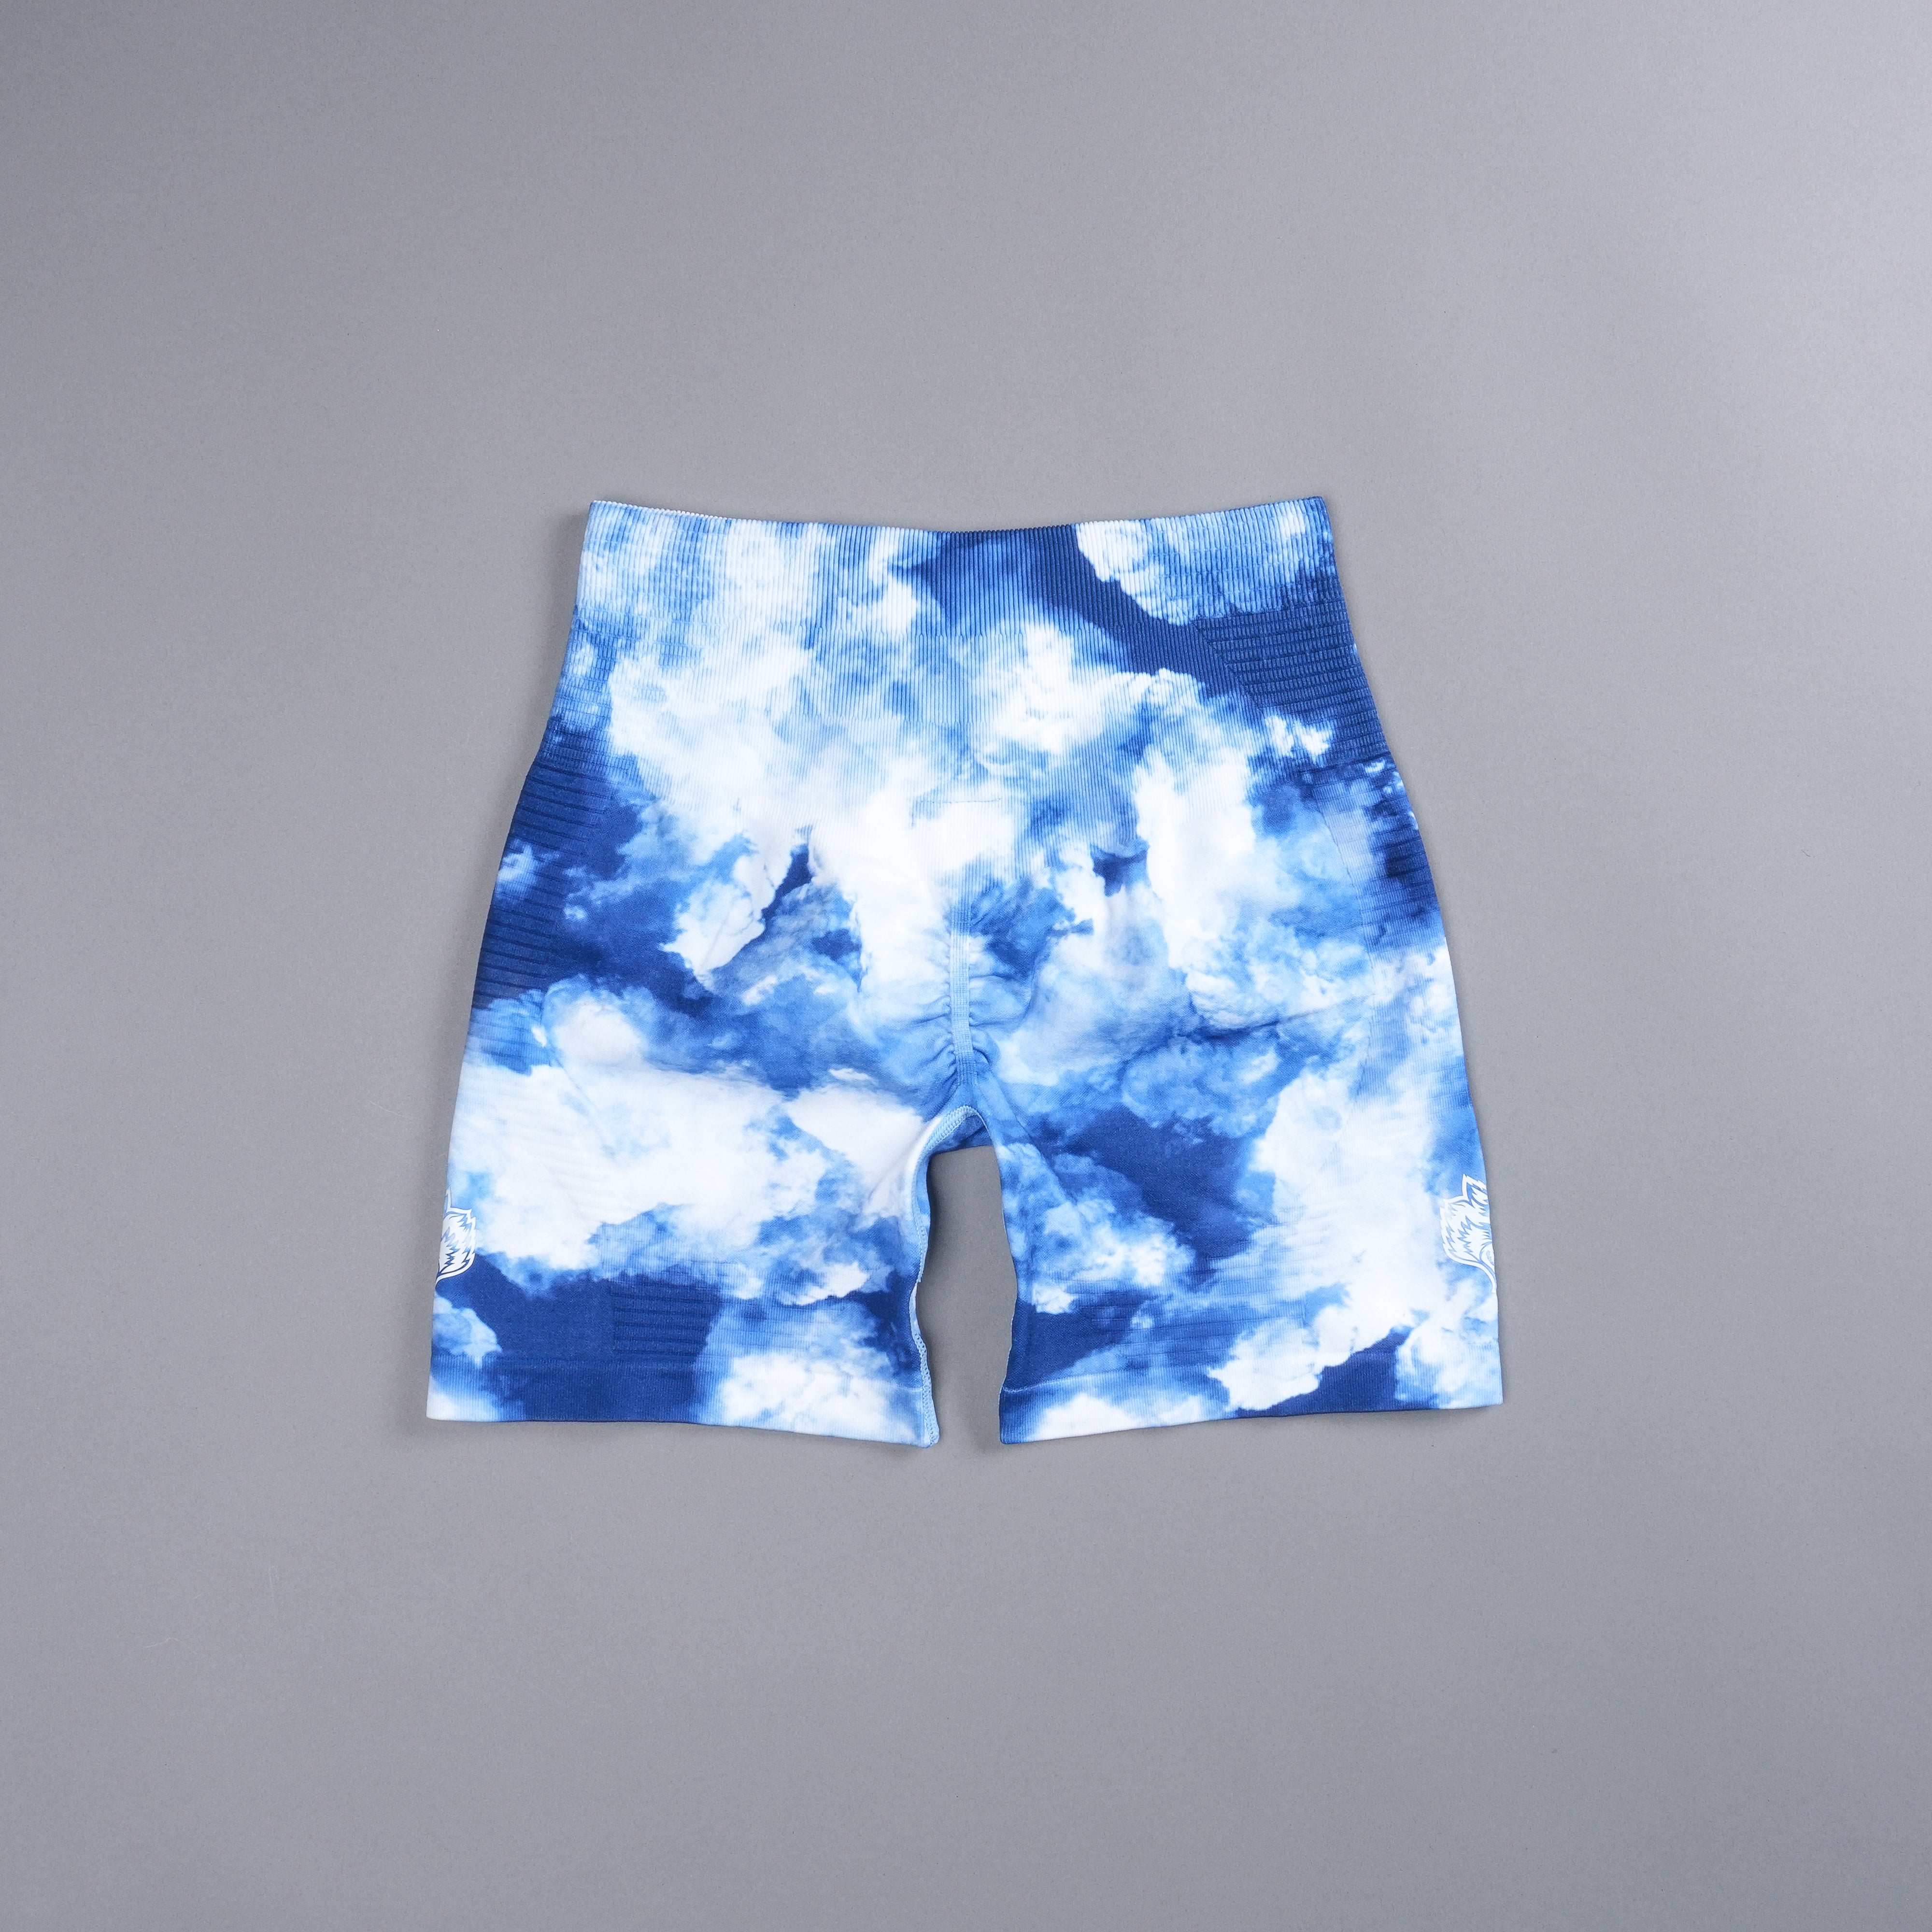 Dual Wolf Everson Seamless "Valencourt" Shorts in Blue Sky